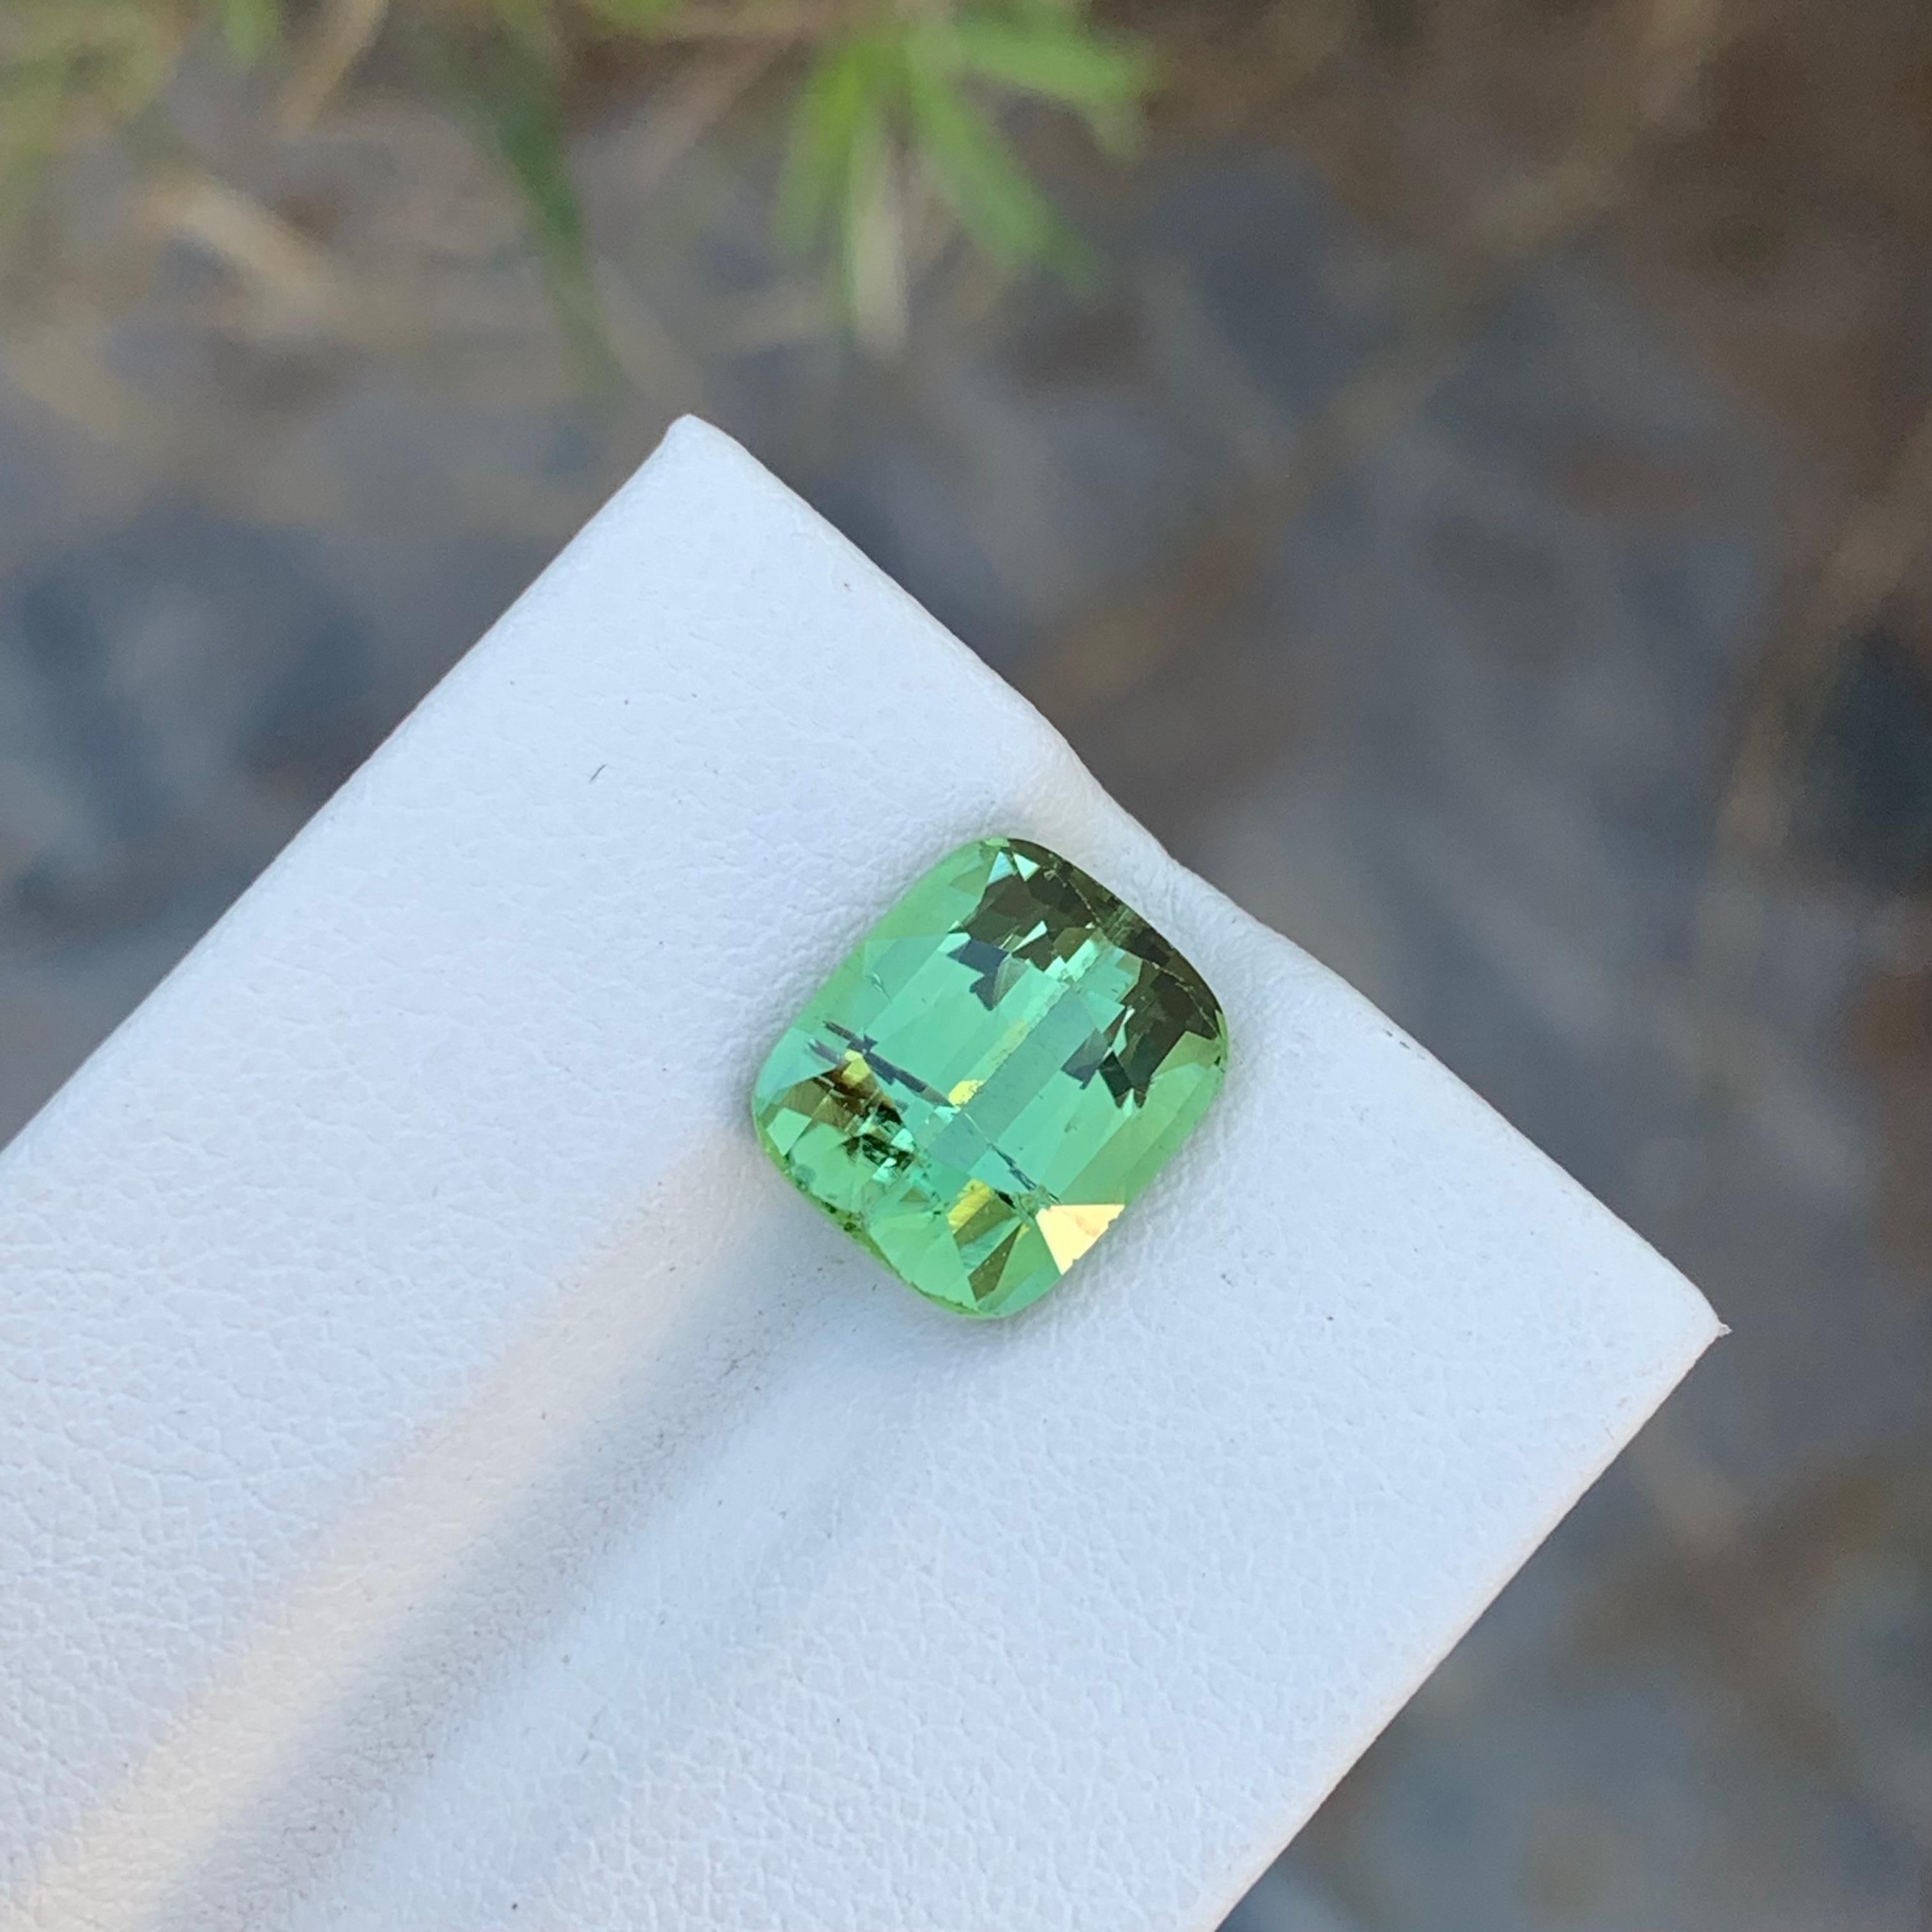 Loose Mint Tourmaline
Weight: 5.00 Carats
Dimension: 10.6 x 9.1 x6.5 Mm
Colour: Mint Green
Origin: Afghanistan
Treatment: Non
Certificate: On Demand
Shape: Cushion 

Mint tourmaline, a mesmerizing member of the colorful tourmaline family, enchants